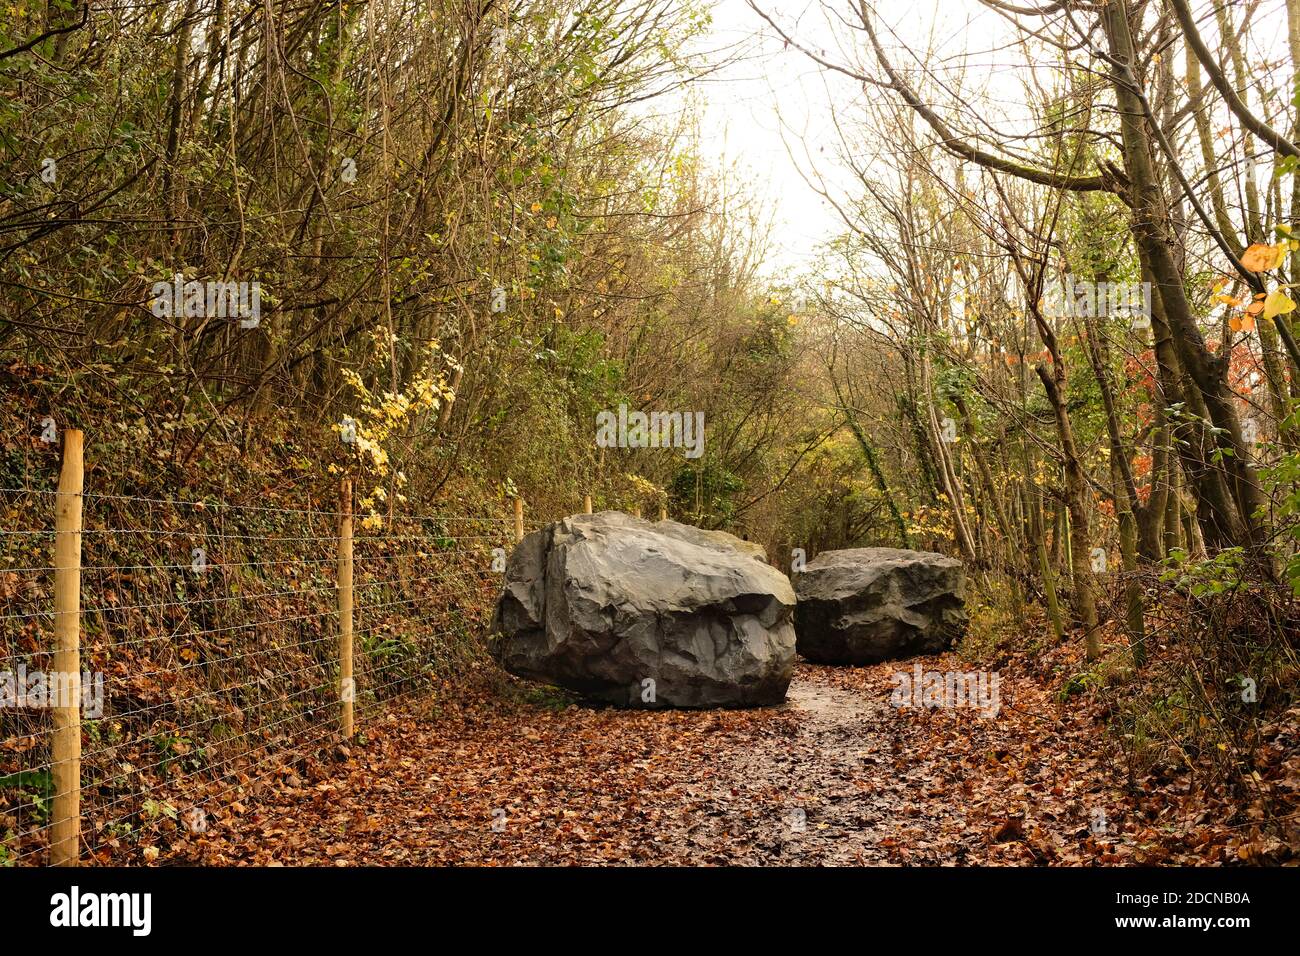 November 2020 - Large boulders placed in a country lane to prevent 4x4 off roaders using it and destroying the delicate local environment Stock Photo